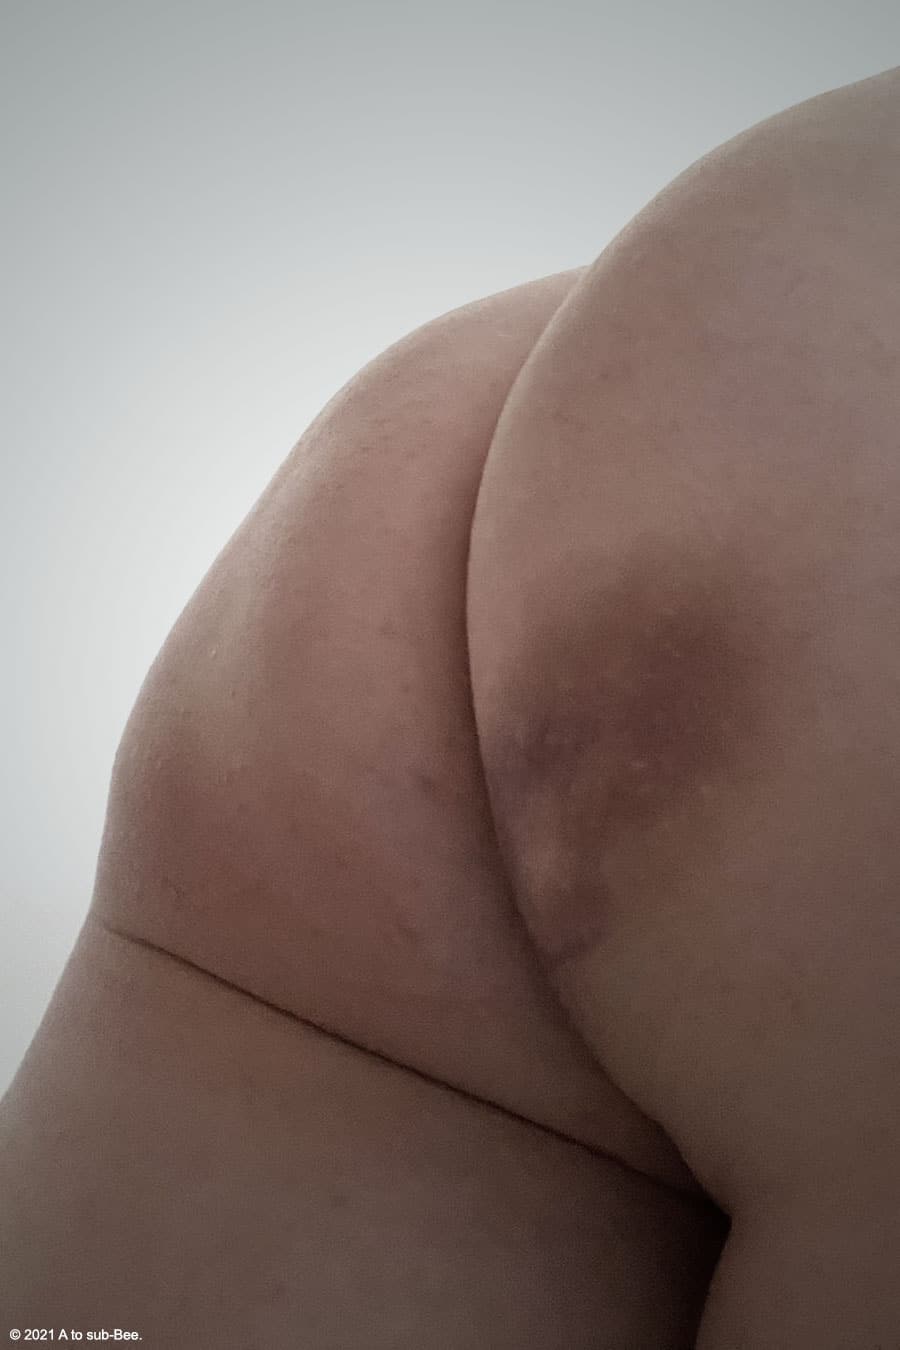 Pointy's bottom with a large bruise caused by The Keeper caning it